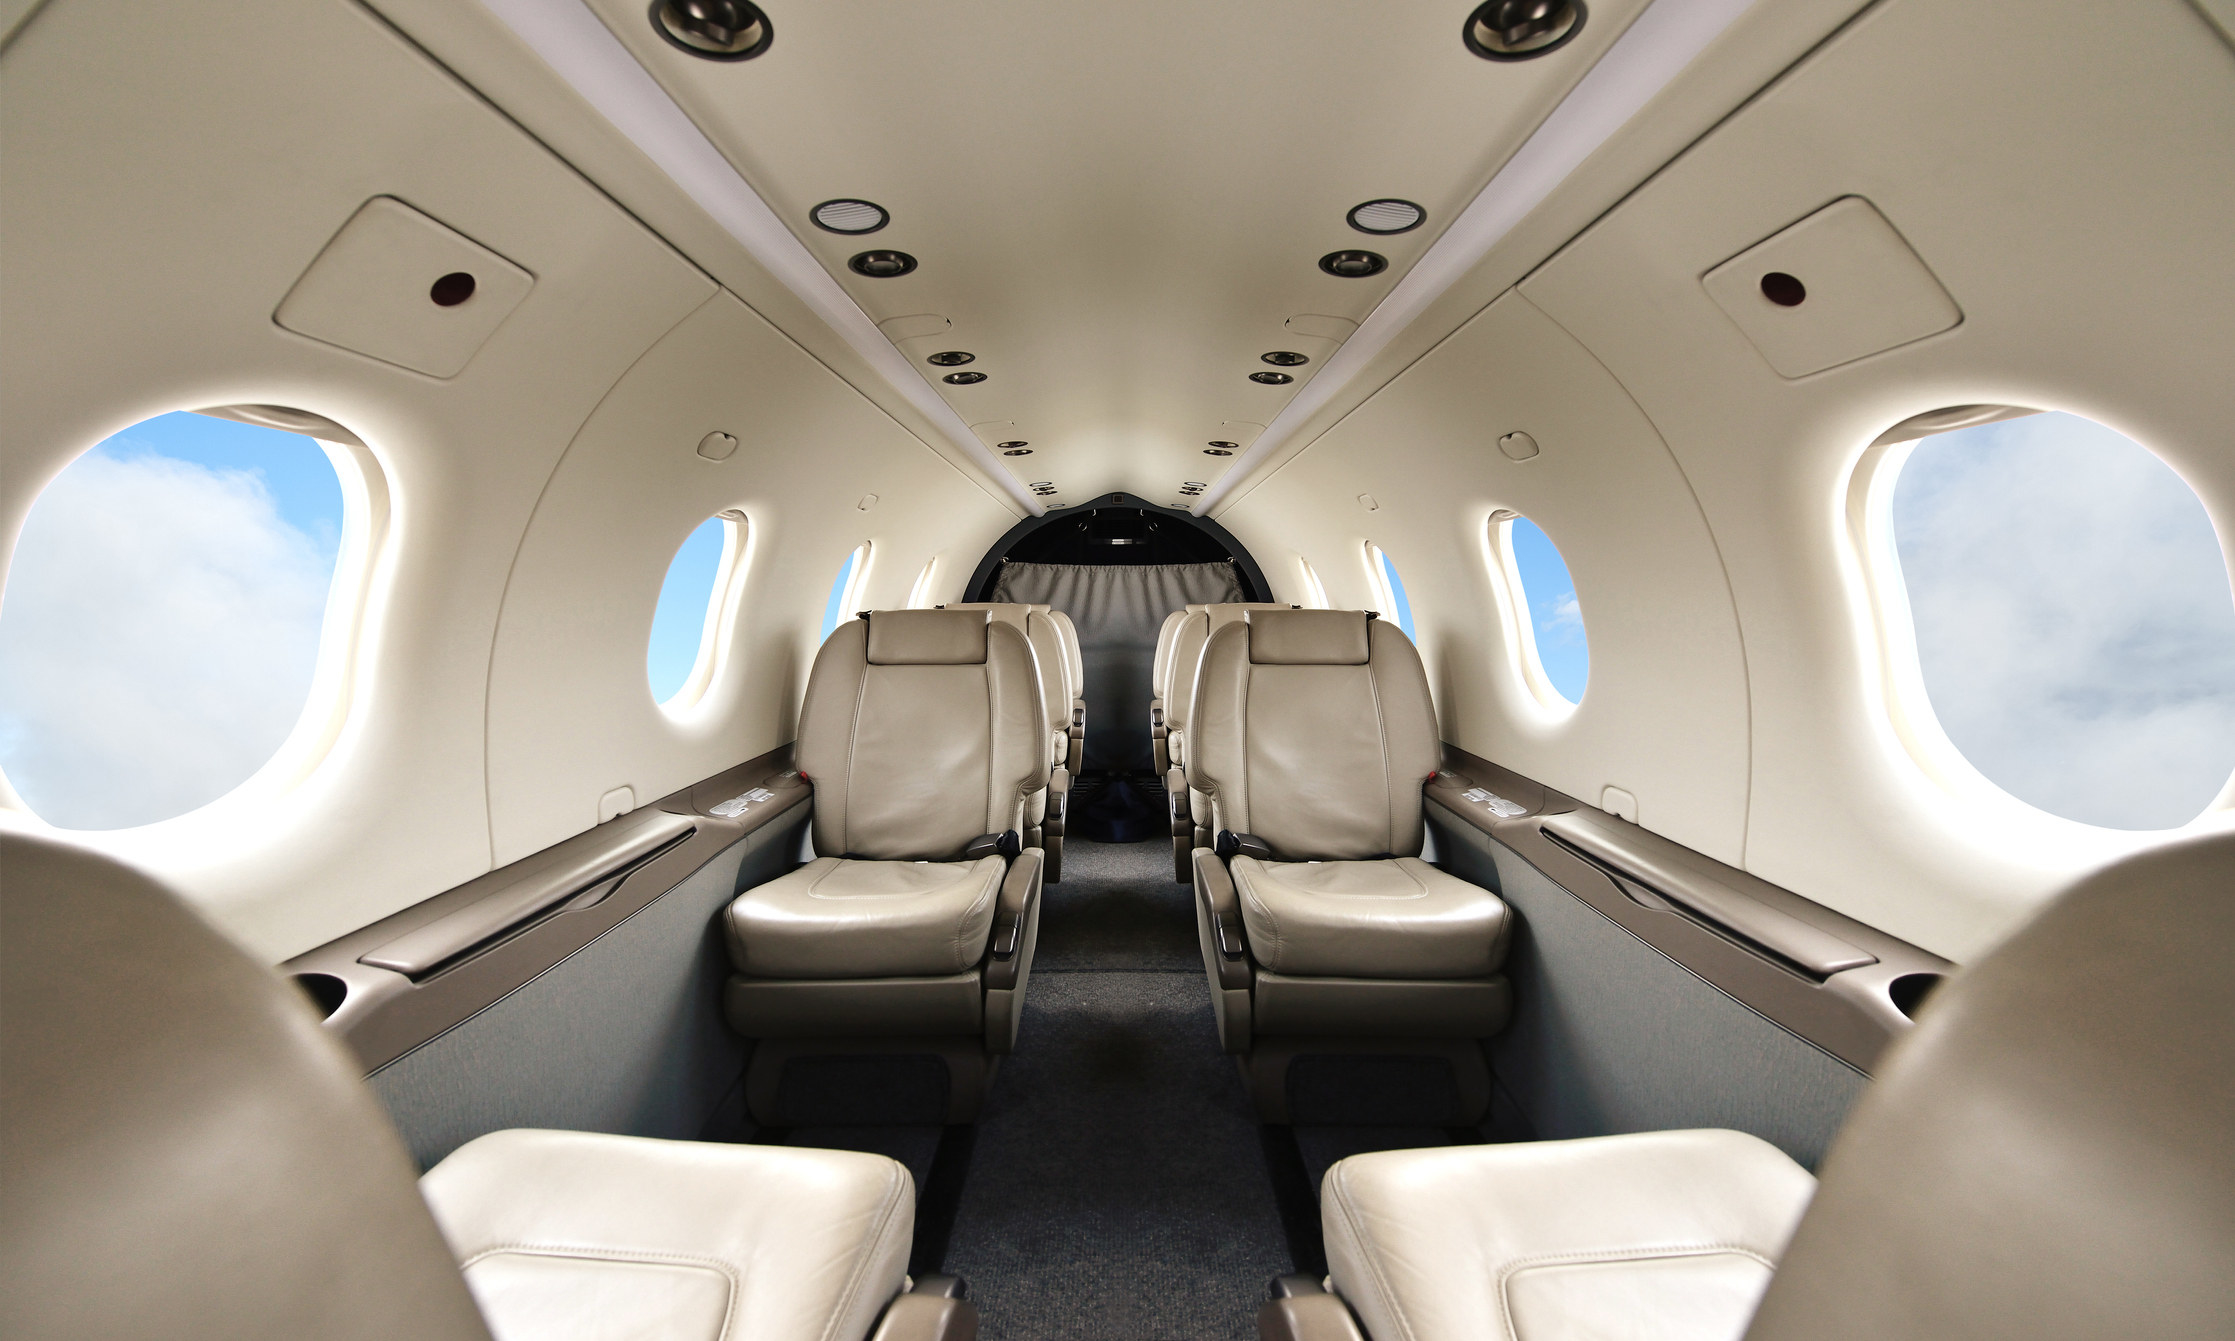 The inside of a private jet.